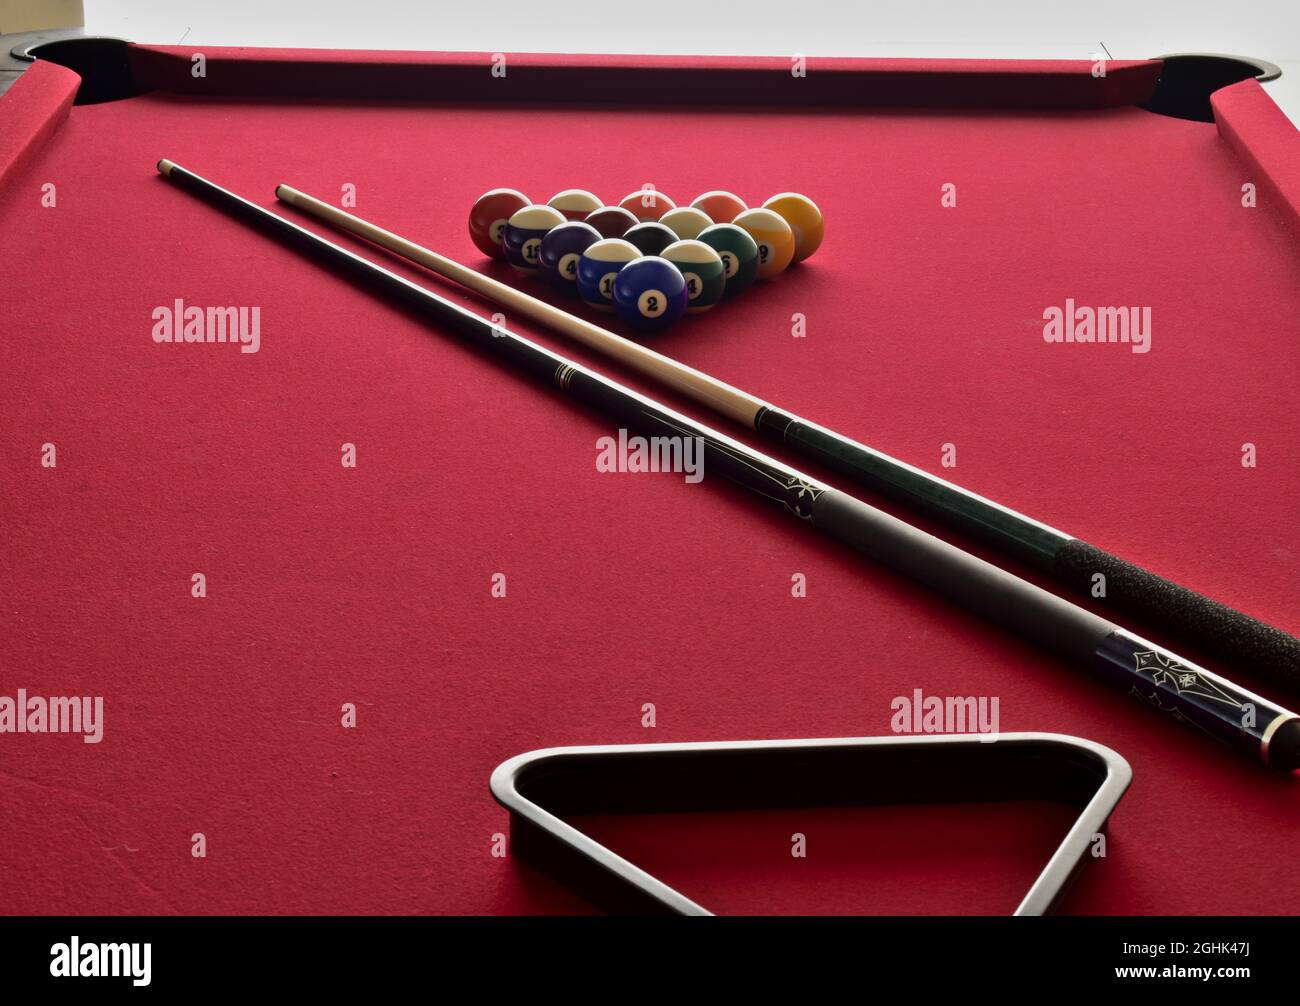 Billiard balls on red felt pool table with cues and black rack Stock Photo